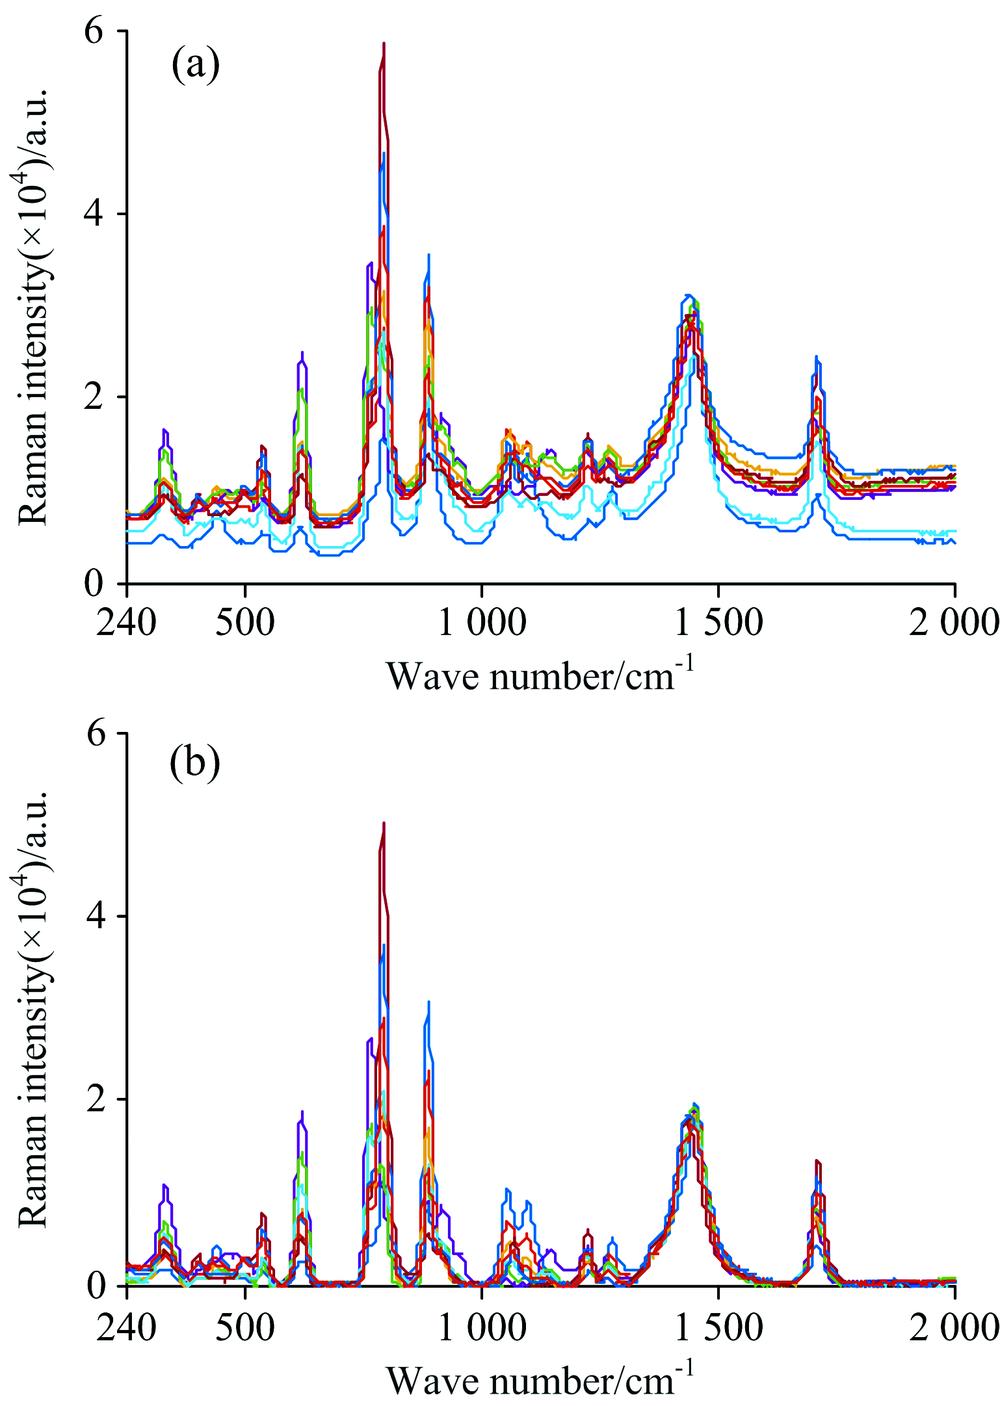 (a) The raw Raman spectra of S1 sample; (b) The preprocess Raman spectra of S1 sample